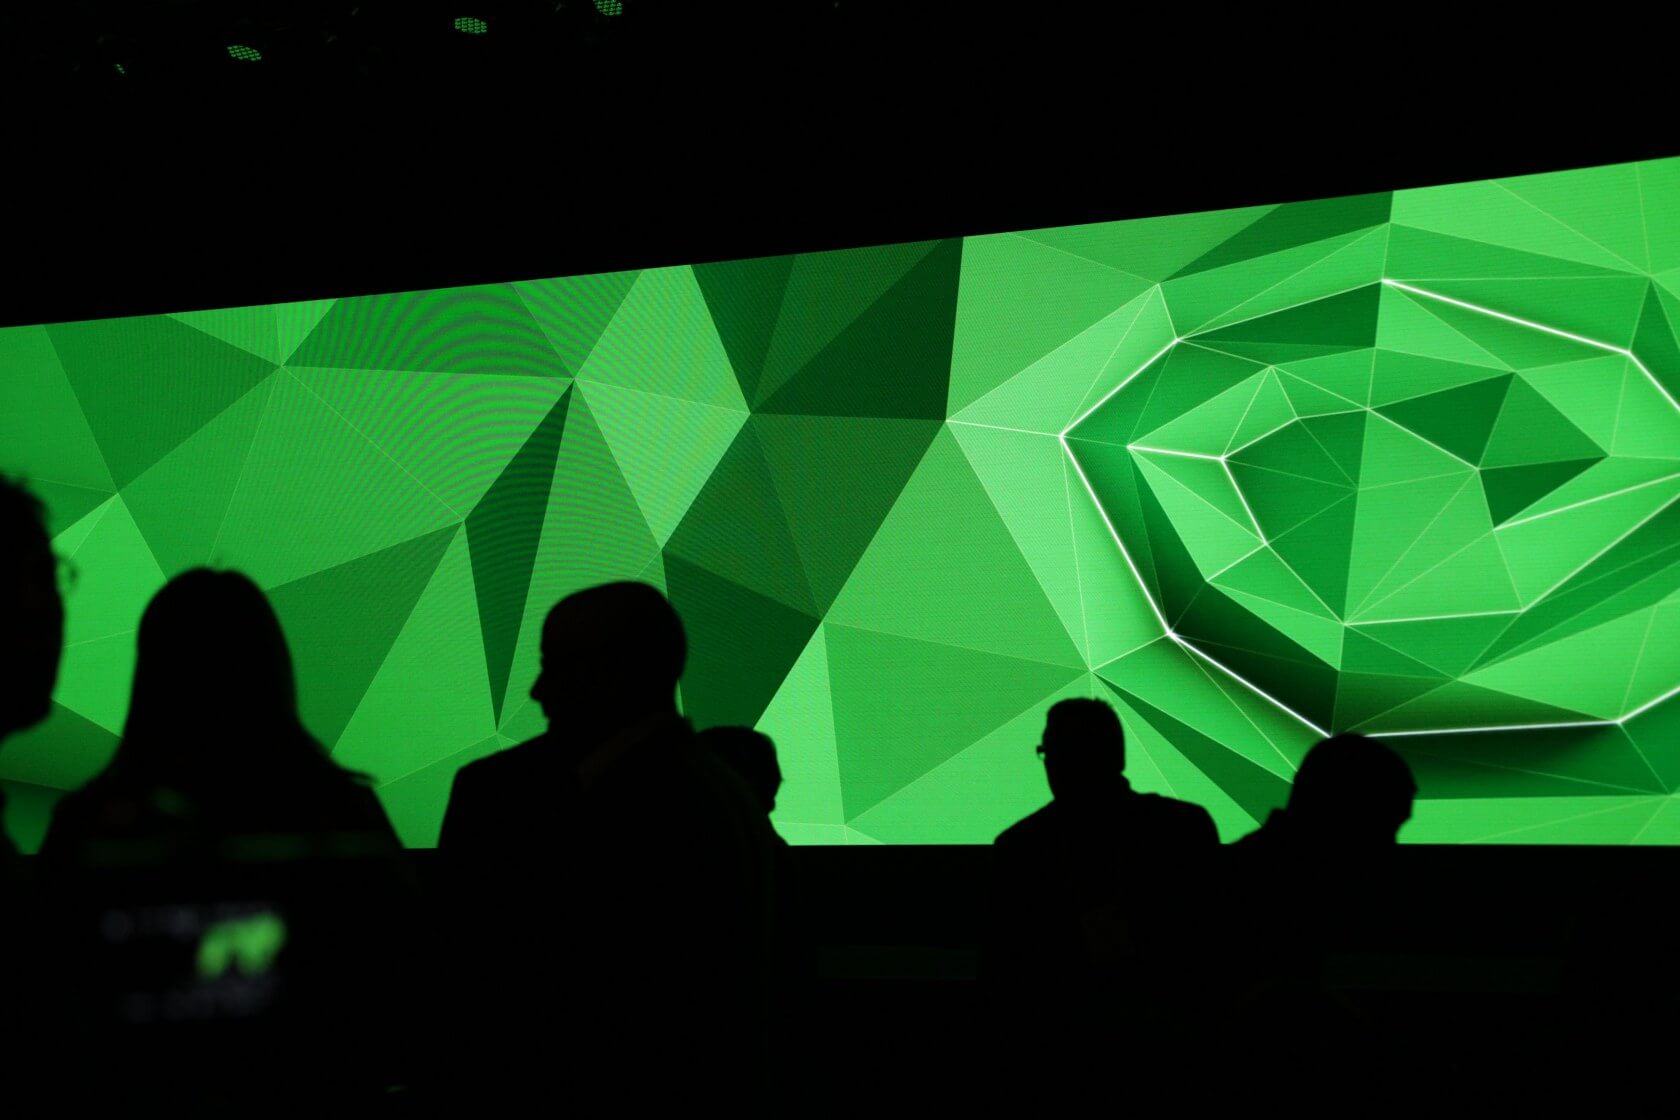 Nvidia tweets, then deletes a mysterious teaser showing an animated blinking eye